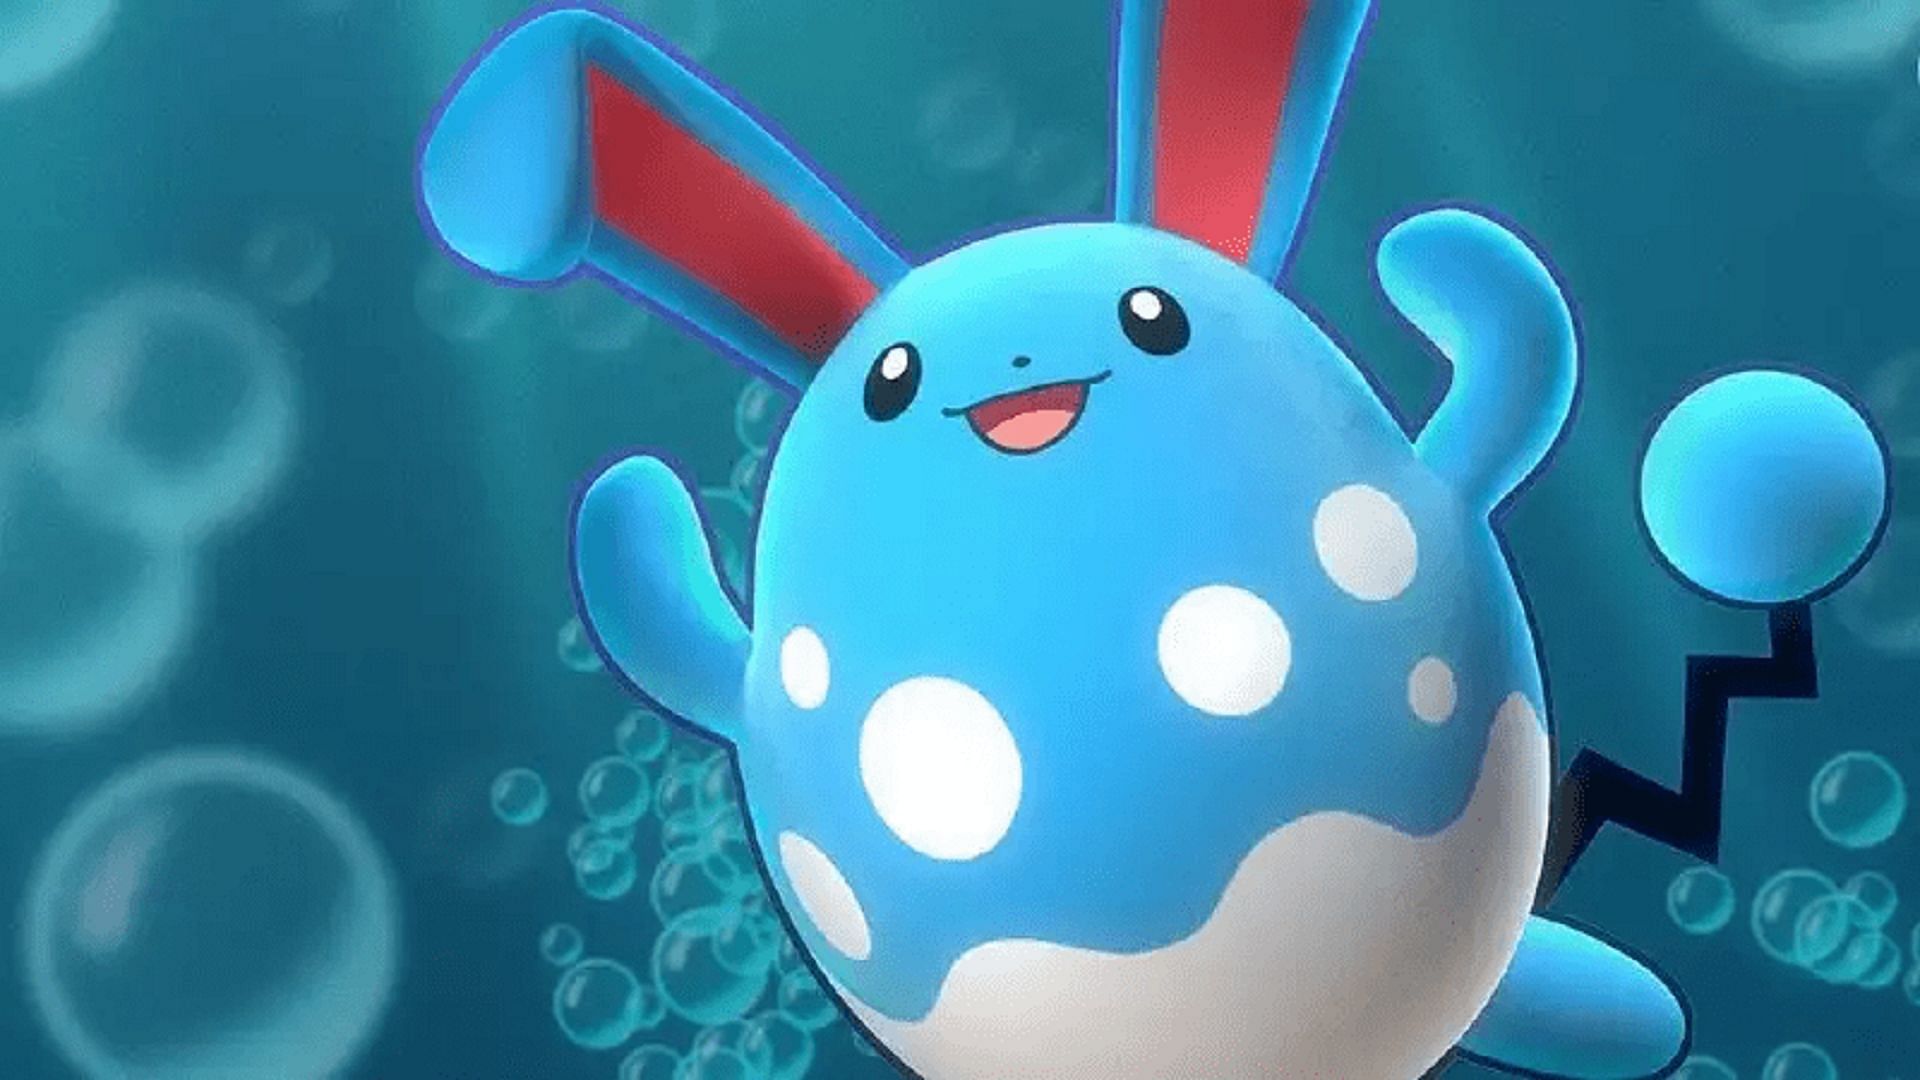 Azumarill is almost inseparable from Great League PvP in Pokemon GO (Image via The Pokemon Company)